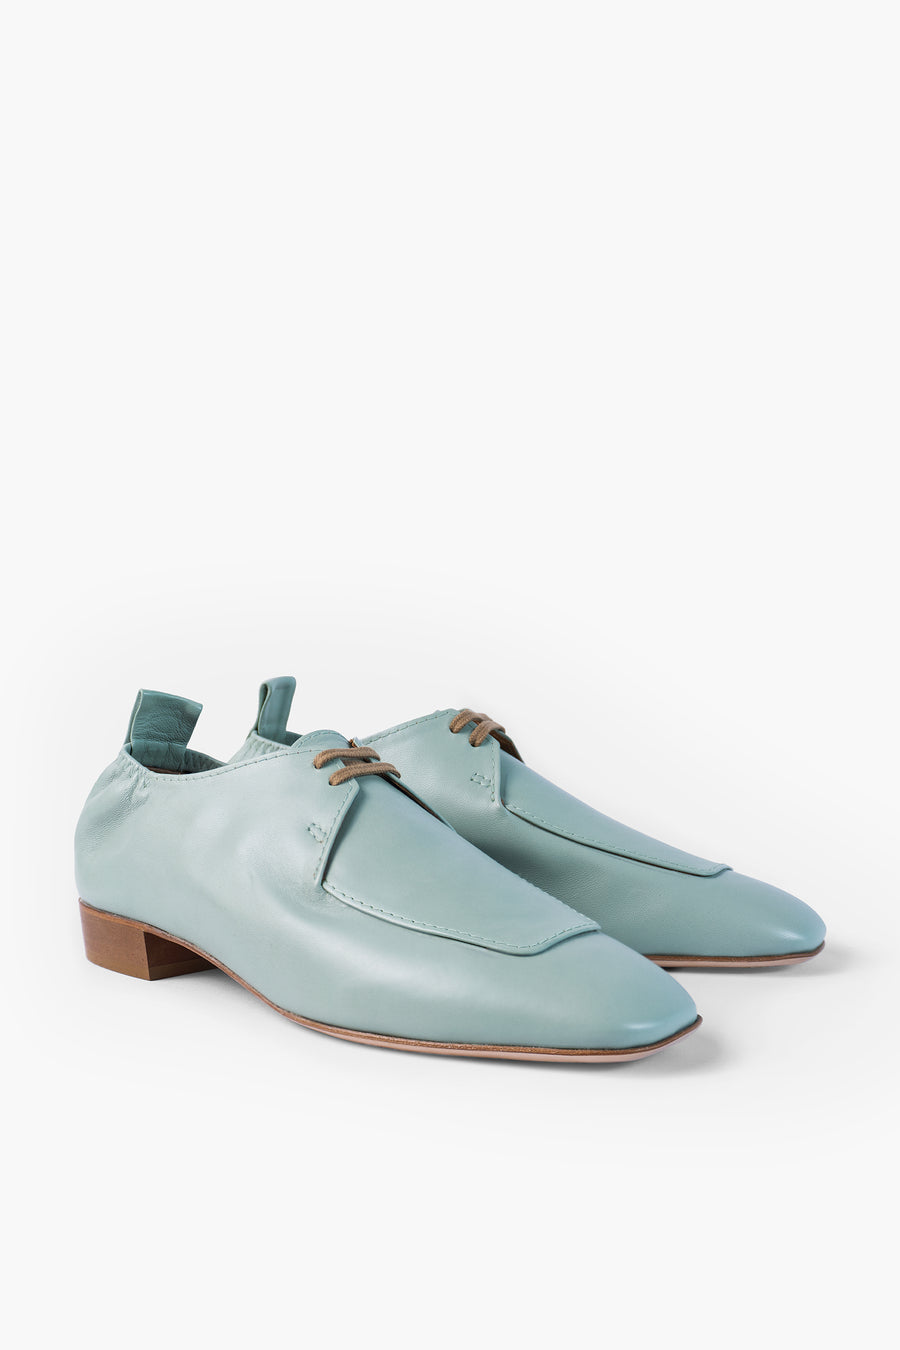 Sustainable, mint coloured Teda shoe, locally produced in Hamburg. Made from metal-free leather. Made in Germany by Alina Schürfeld.